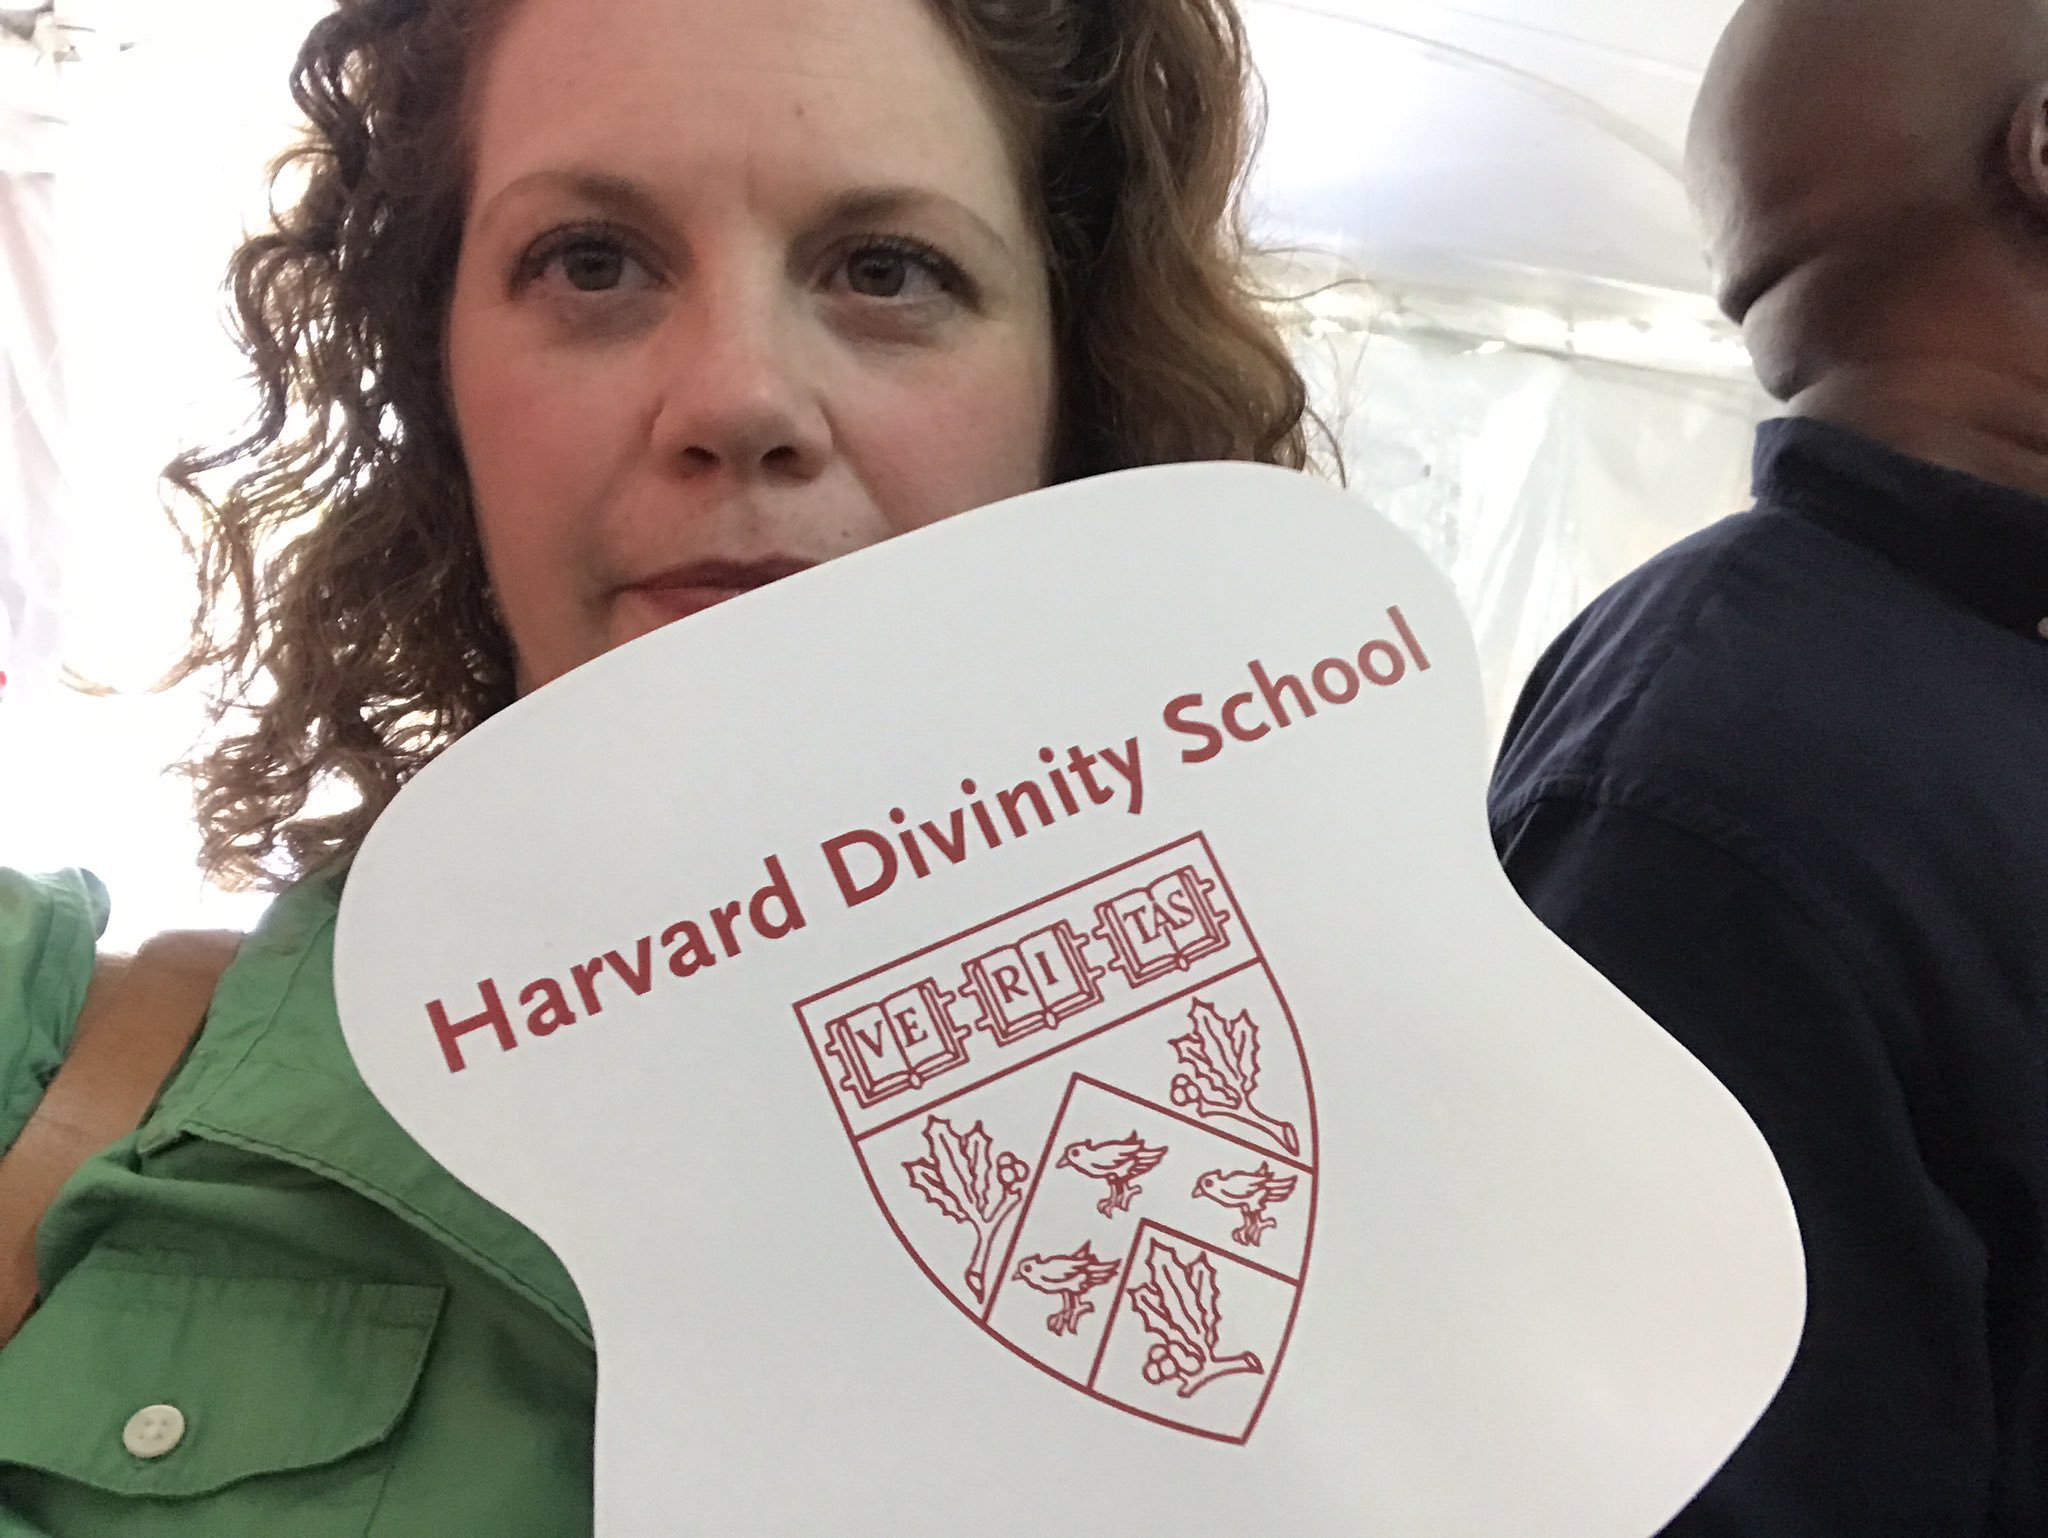 I've got my church lady fan for #HDS200.  Who says ya can't get Church at Harvard!! https://t.co/rKvIsR7oNL